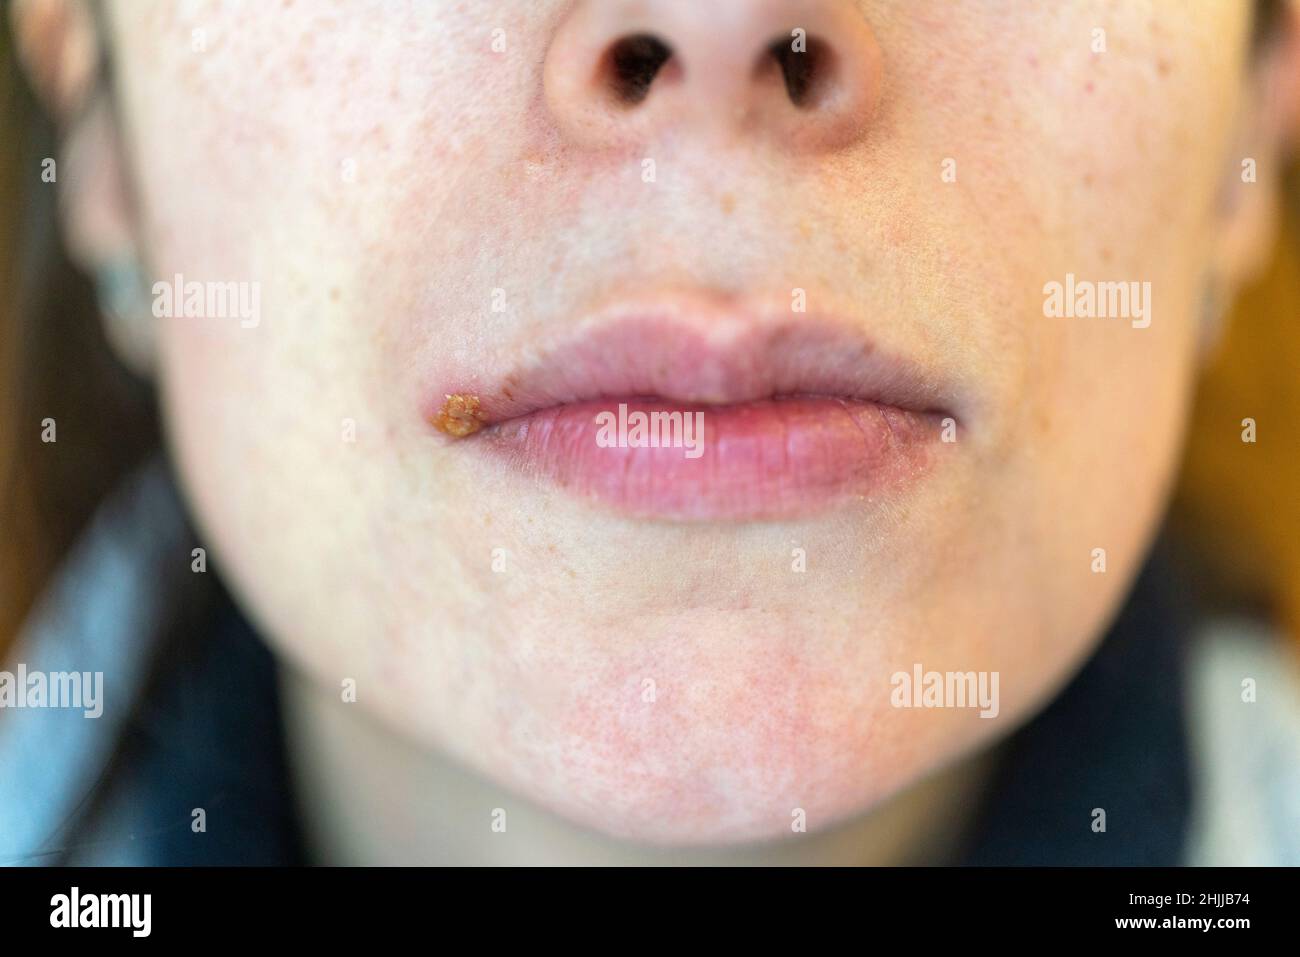 Woman with herpes simplex virus on her upper lip Stock Photo